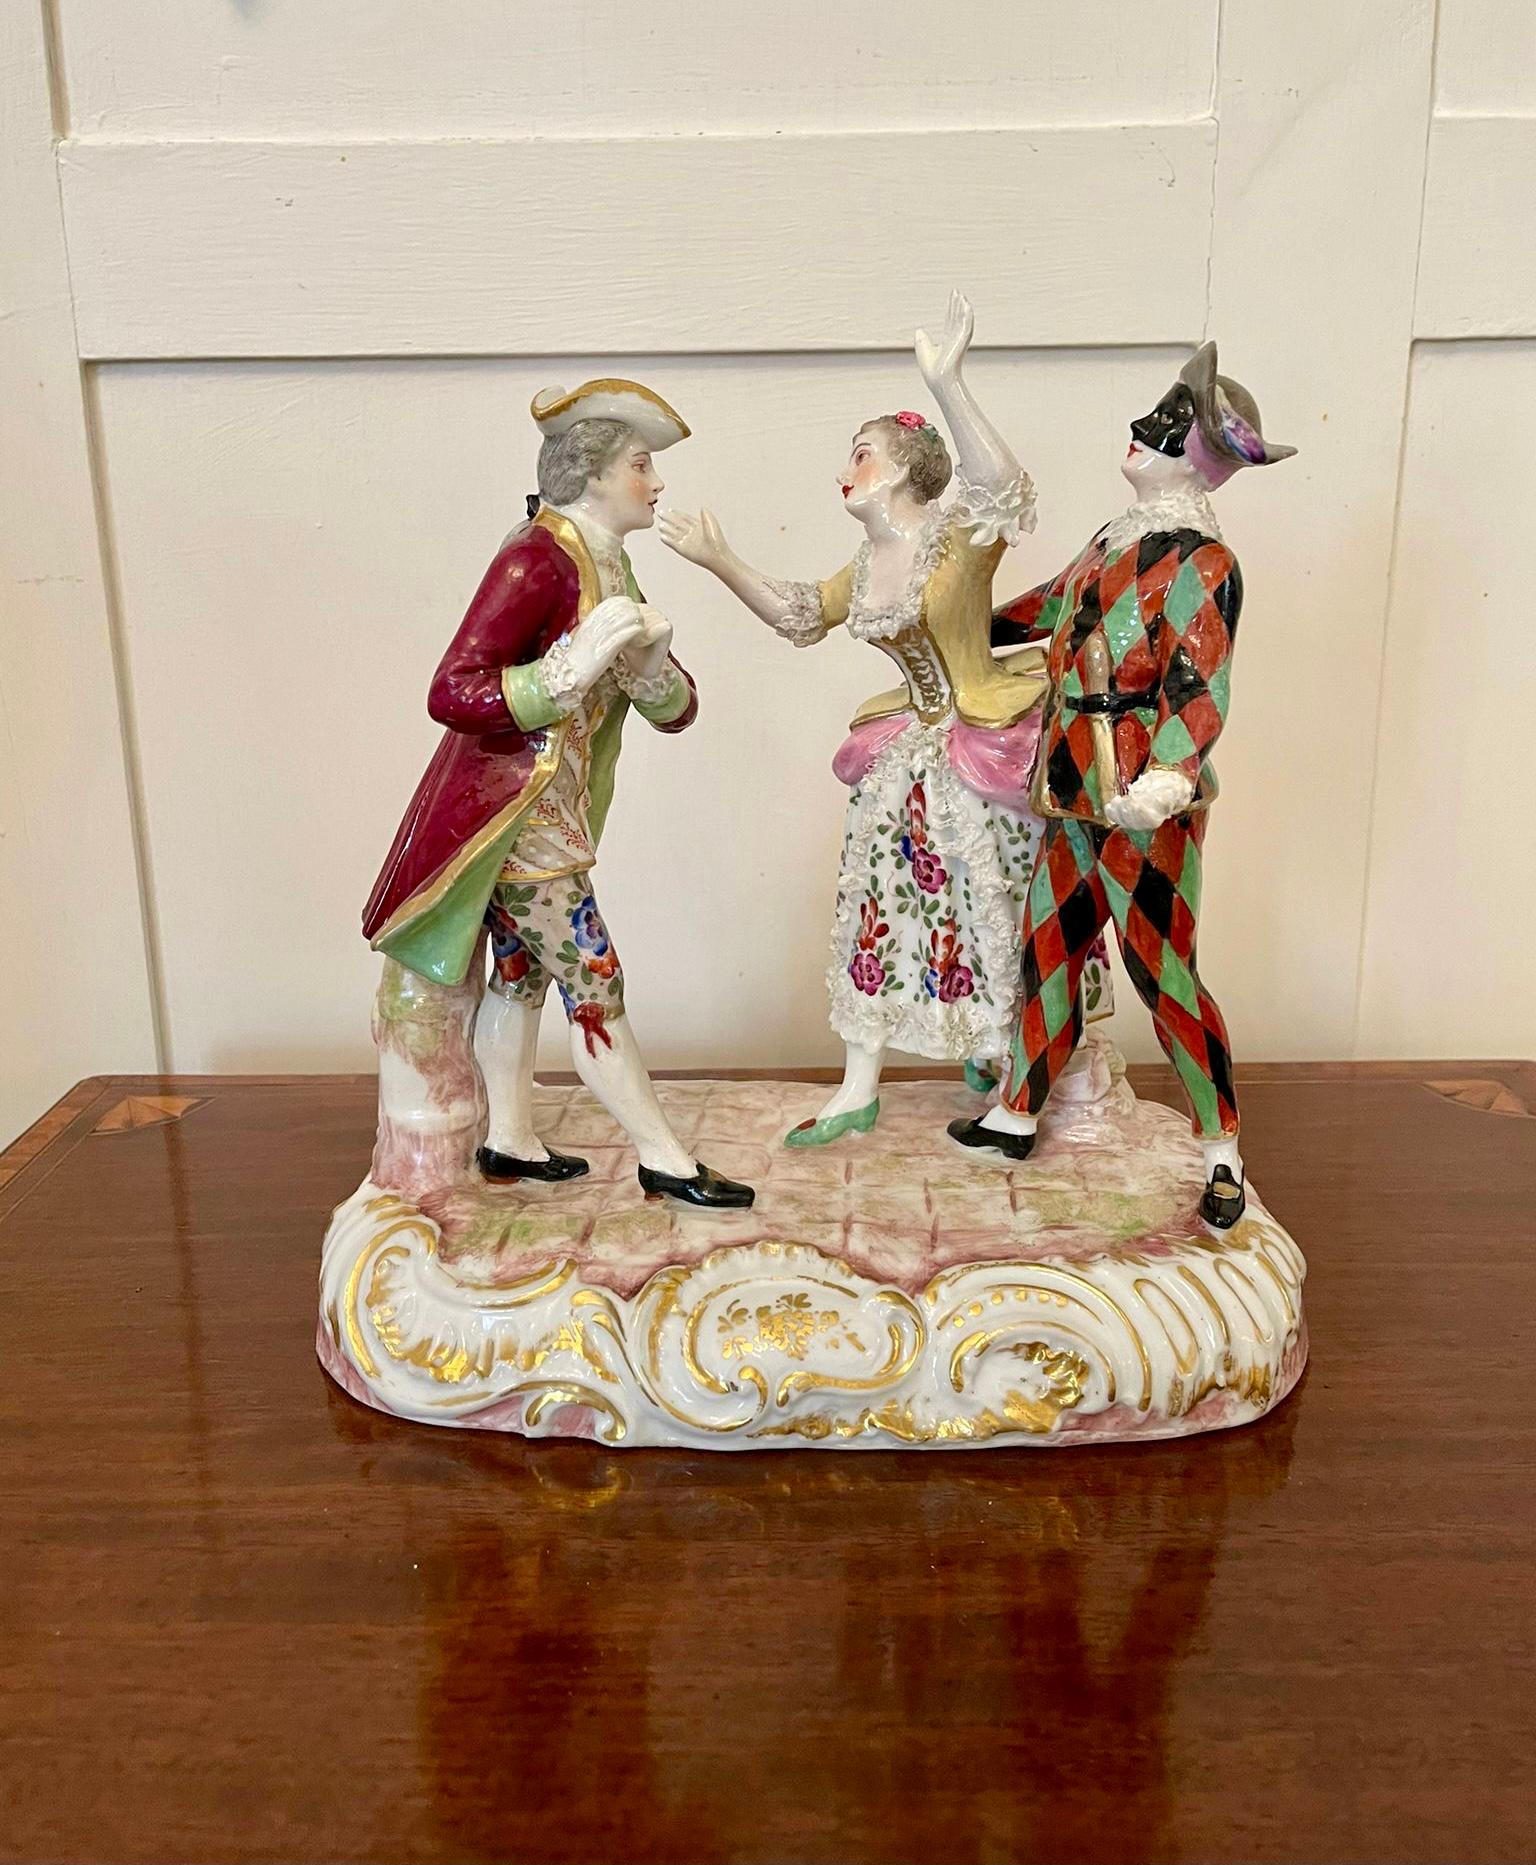 Antique Victorian French porcelain figural group depicting in polychrome a dramatical scene. Maker Eugene Clauss of Paris.

A delightful piece in lovely original condition.

 
Measures: H 22cm 
W 21cm
D 12cm
Date 1870.
 